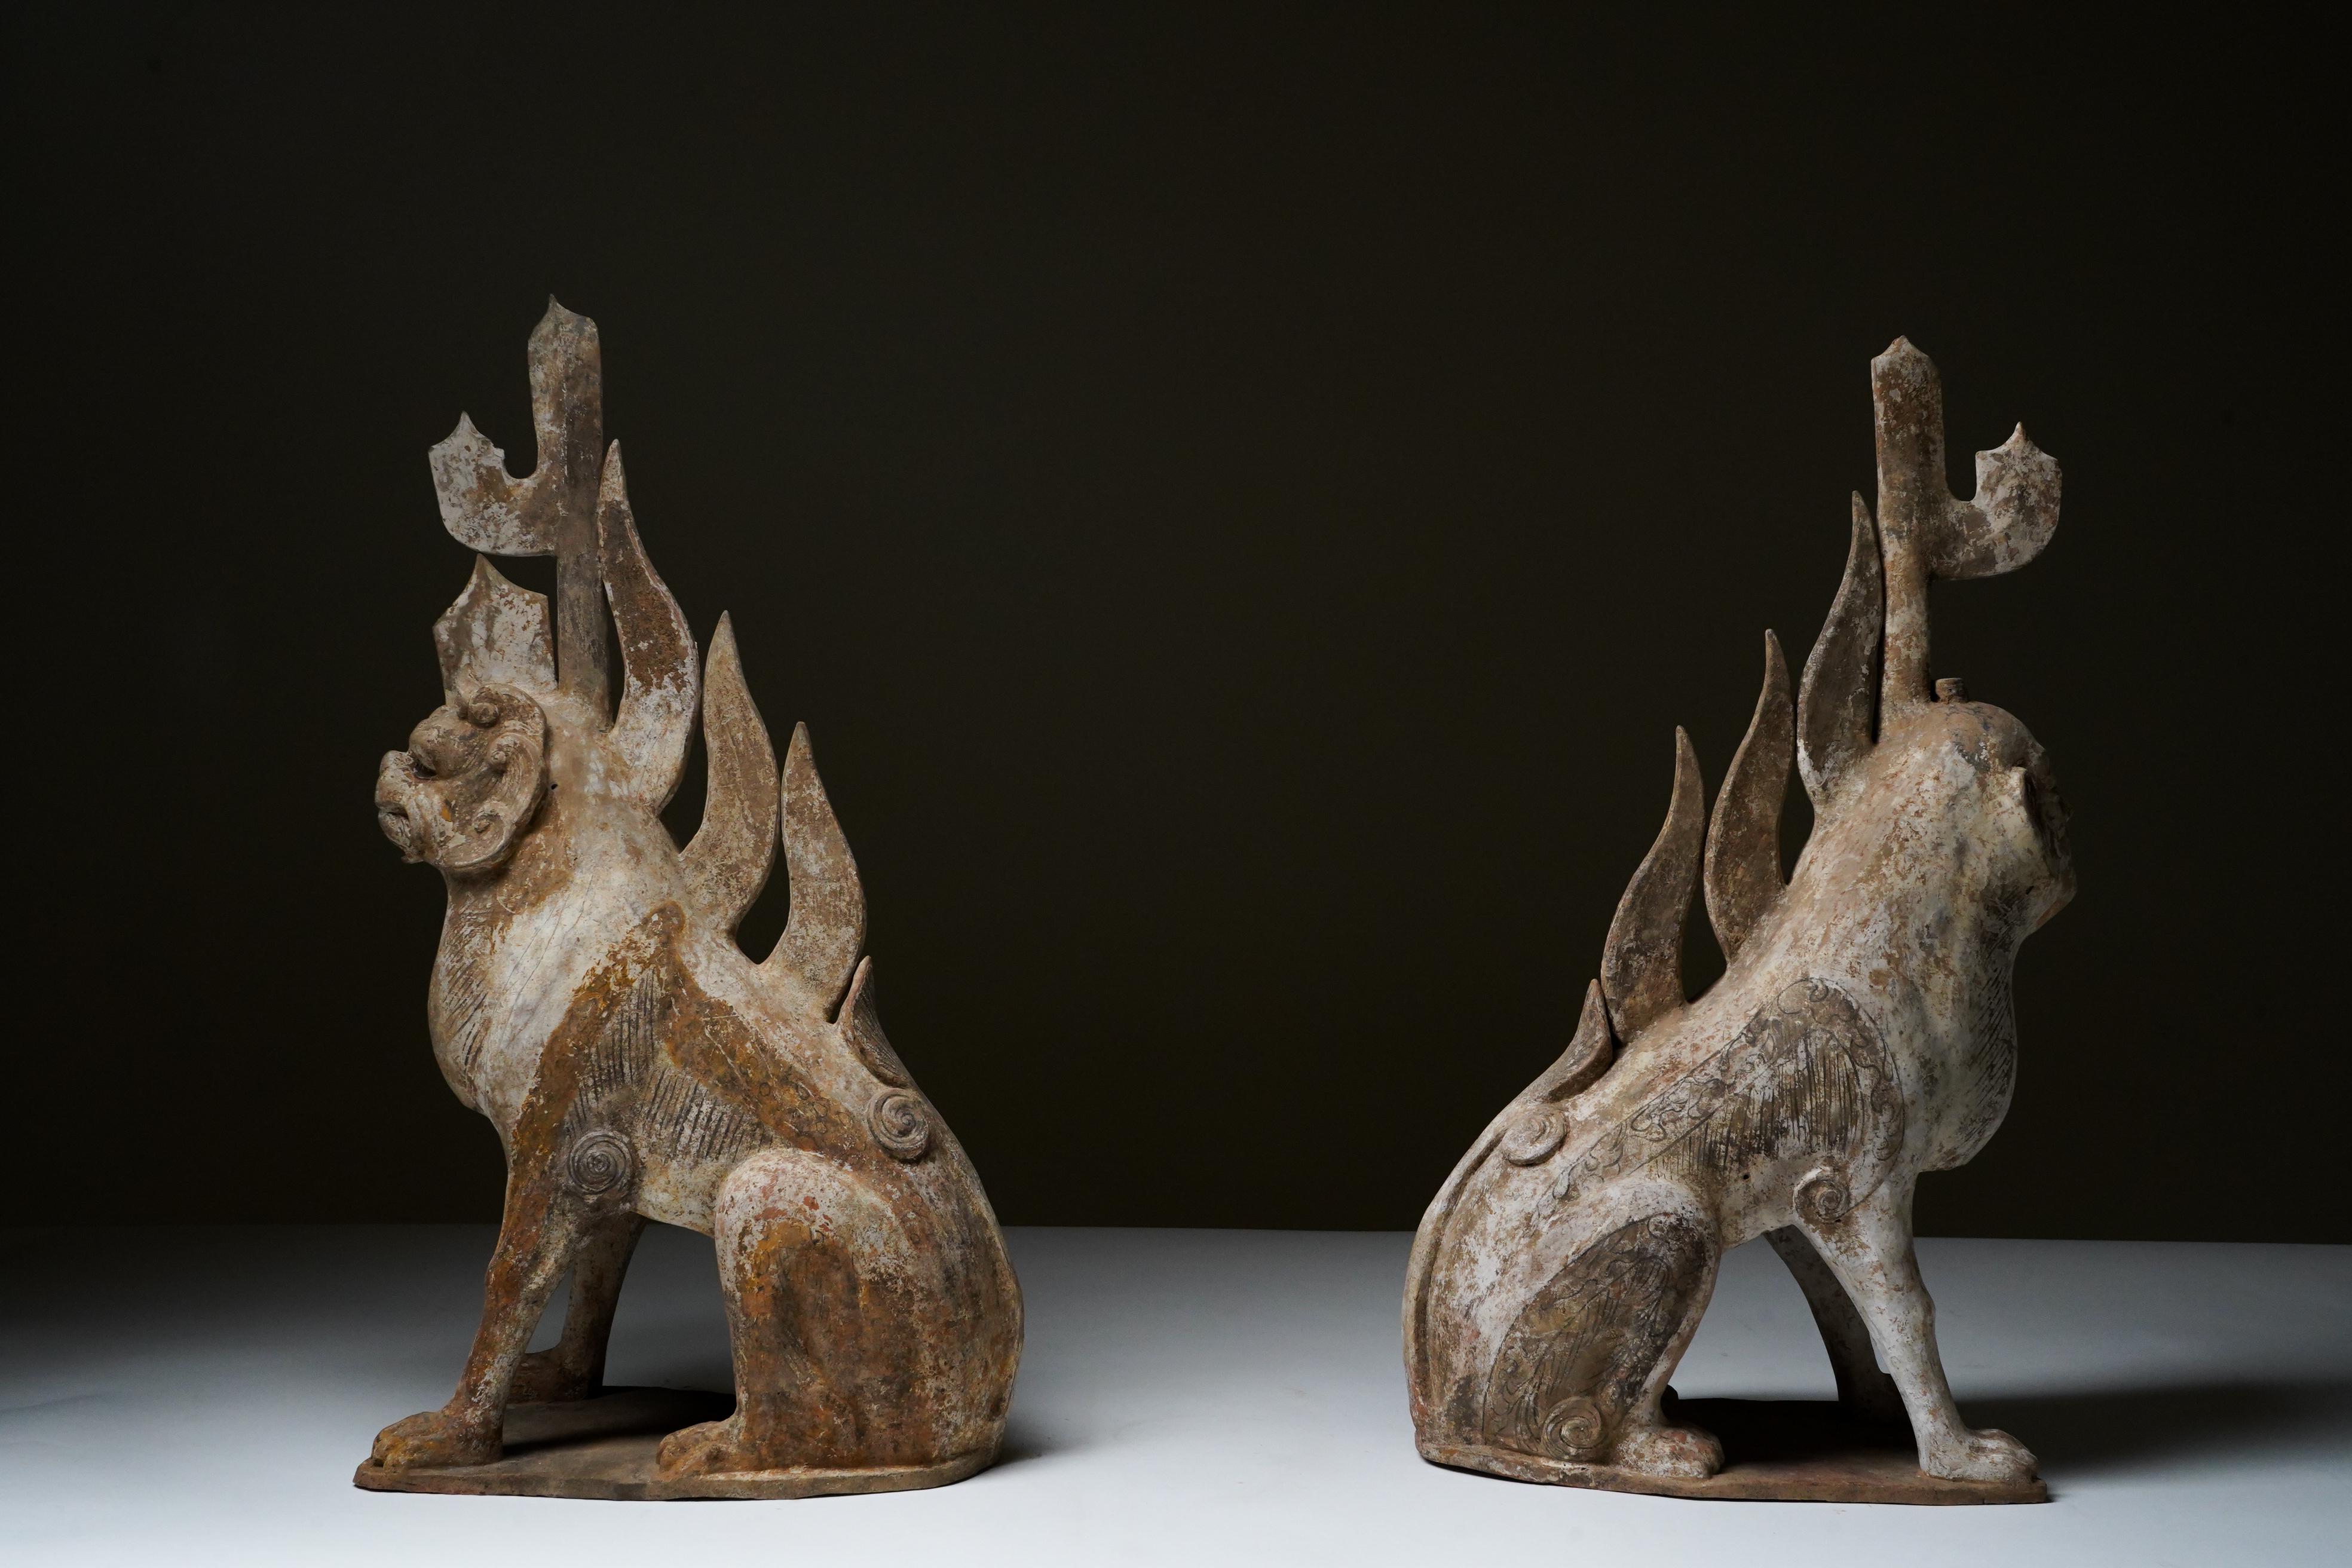 Terracotta A Pair of Tang Dynasty (618-907 CE) Pottery Earth Spirit Figures For Sale